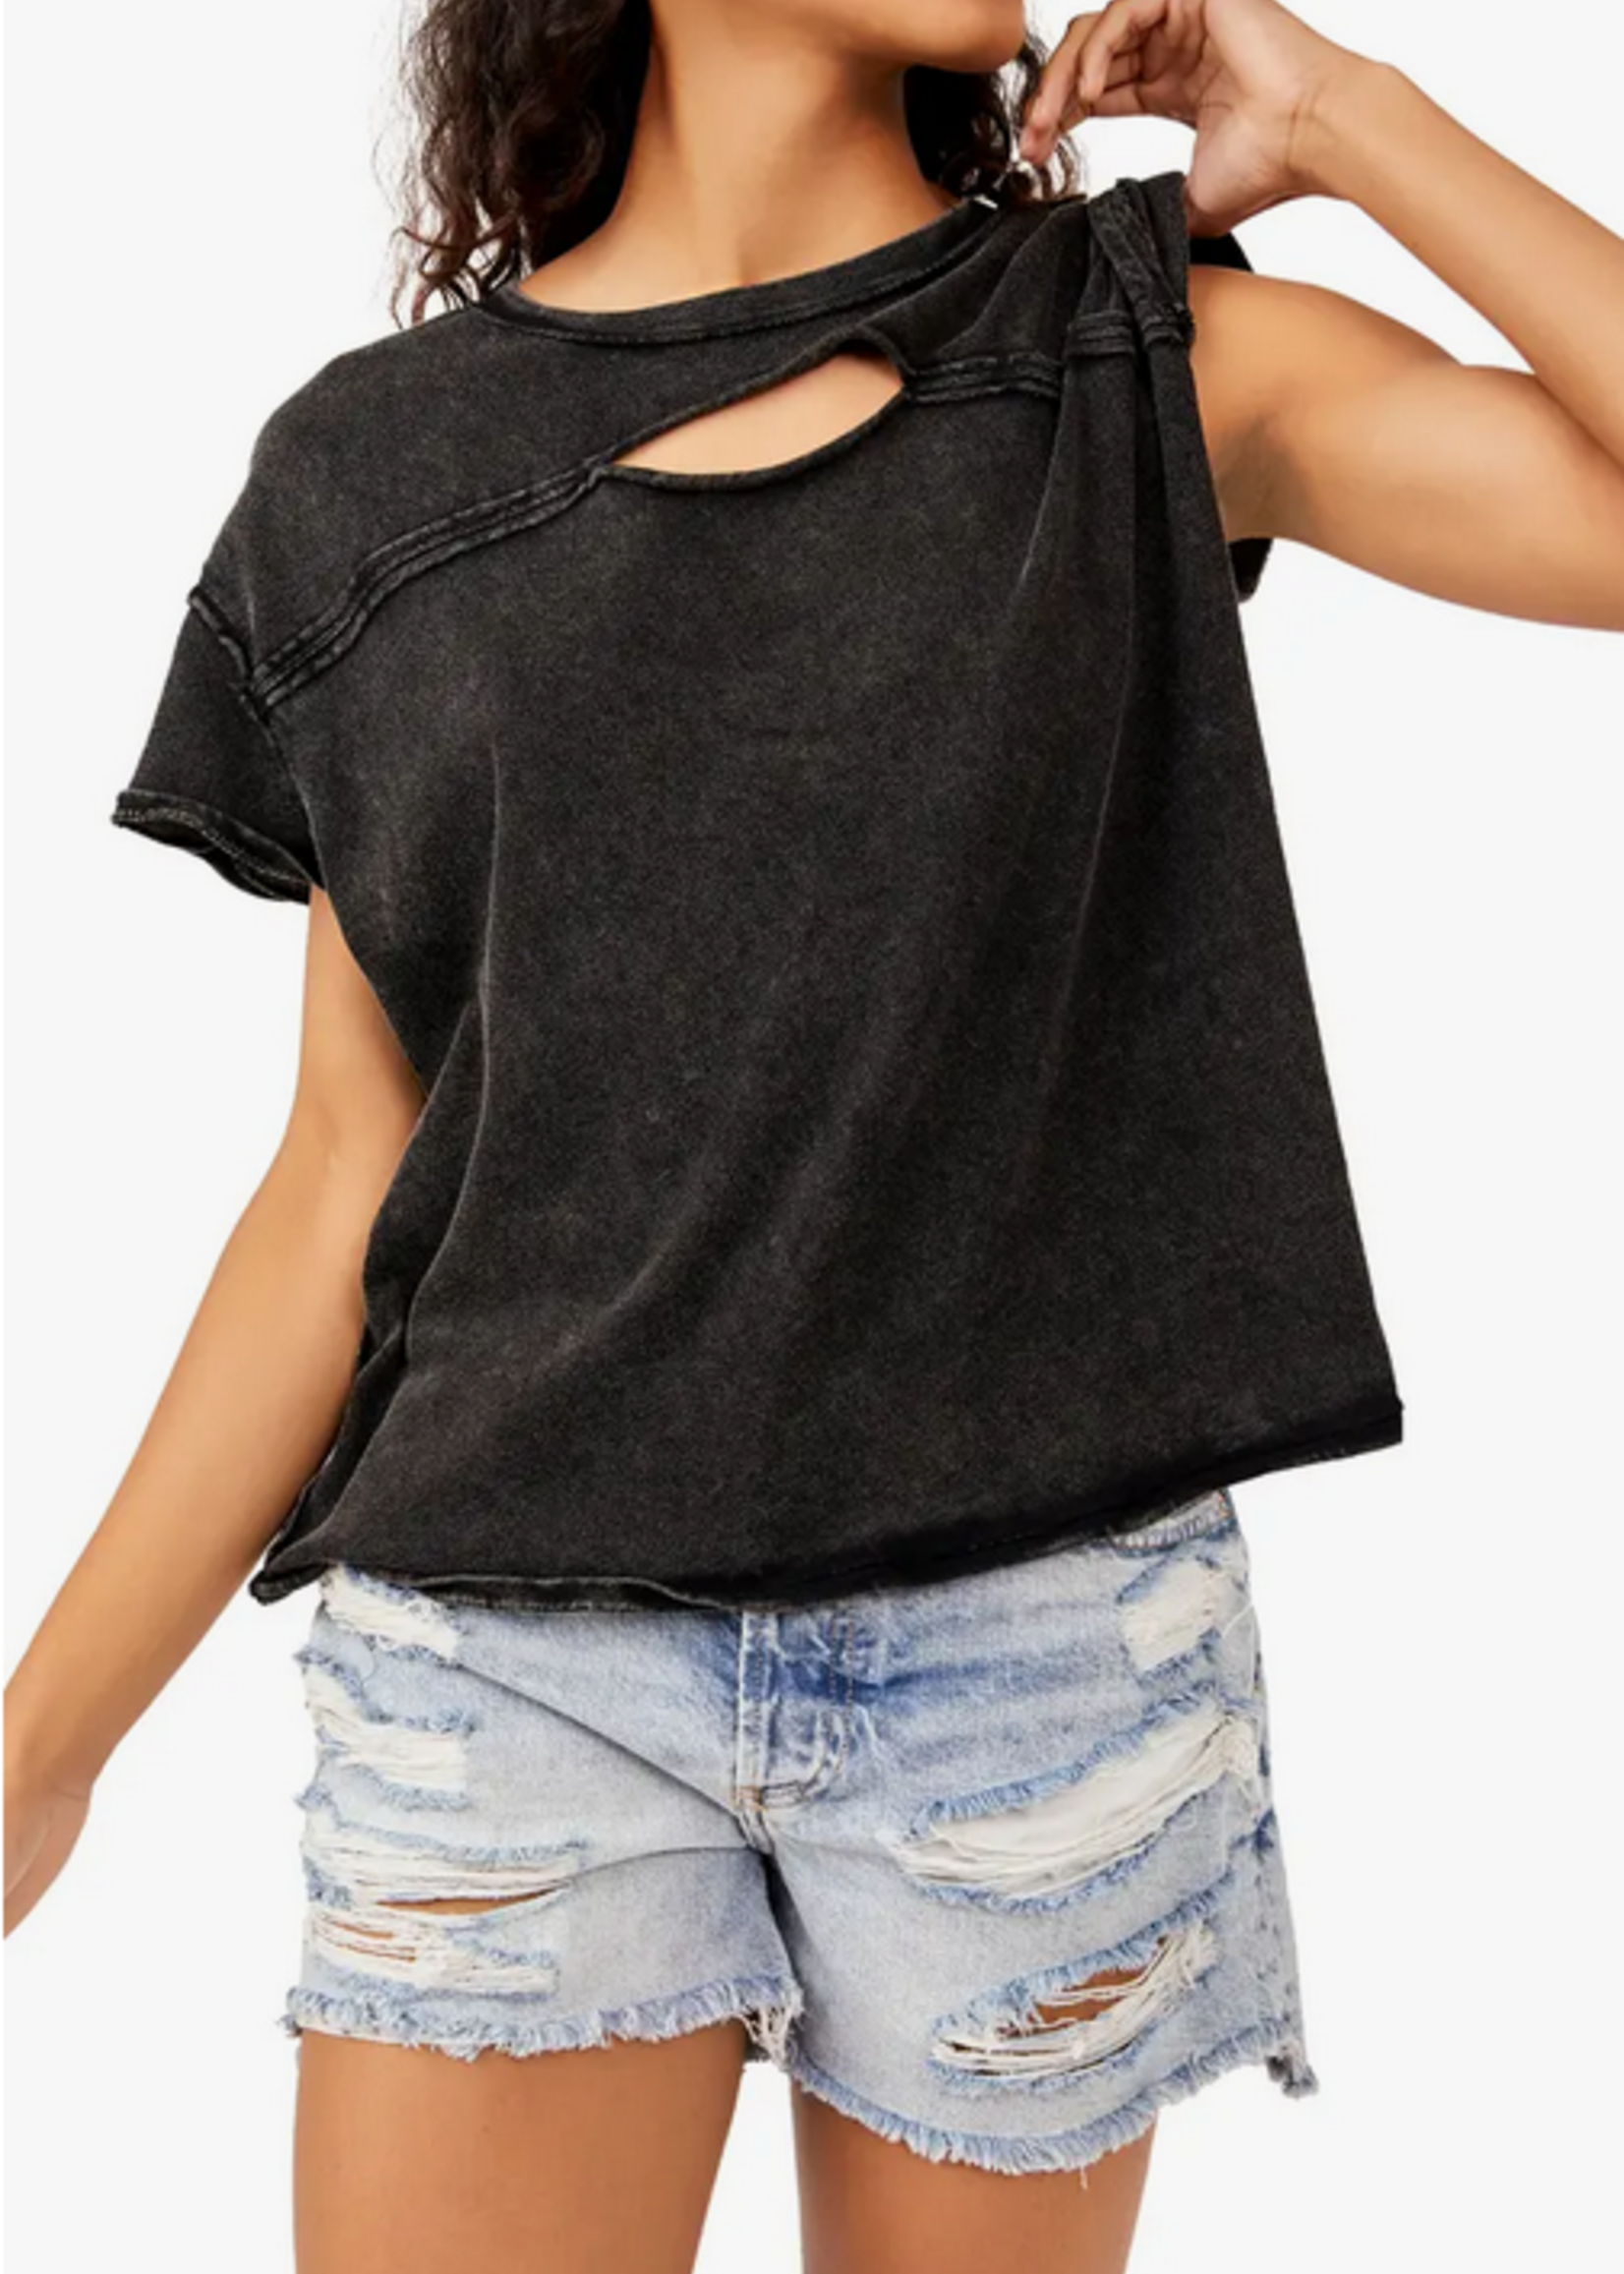 Free People Cut Out Tee - Black